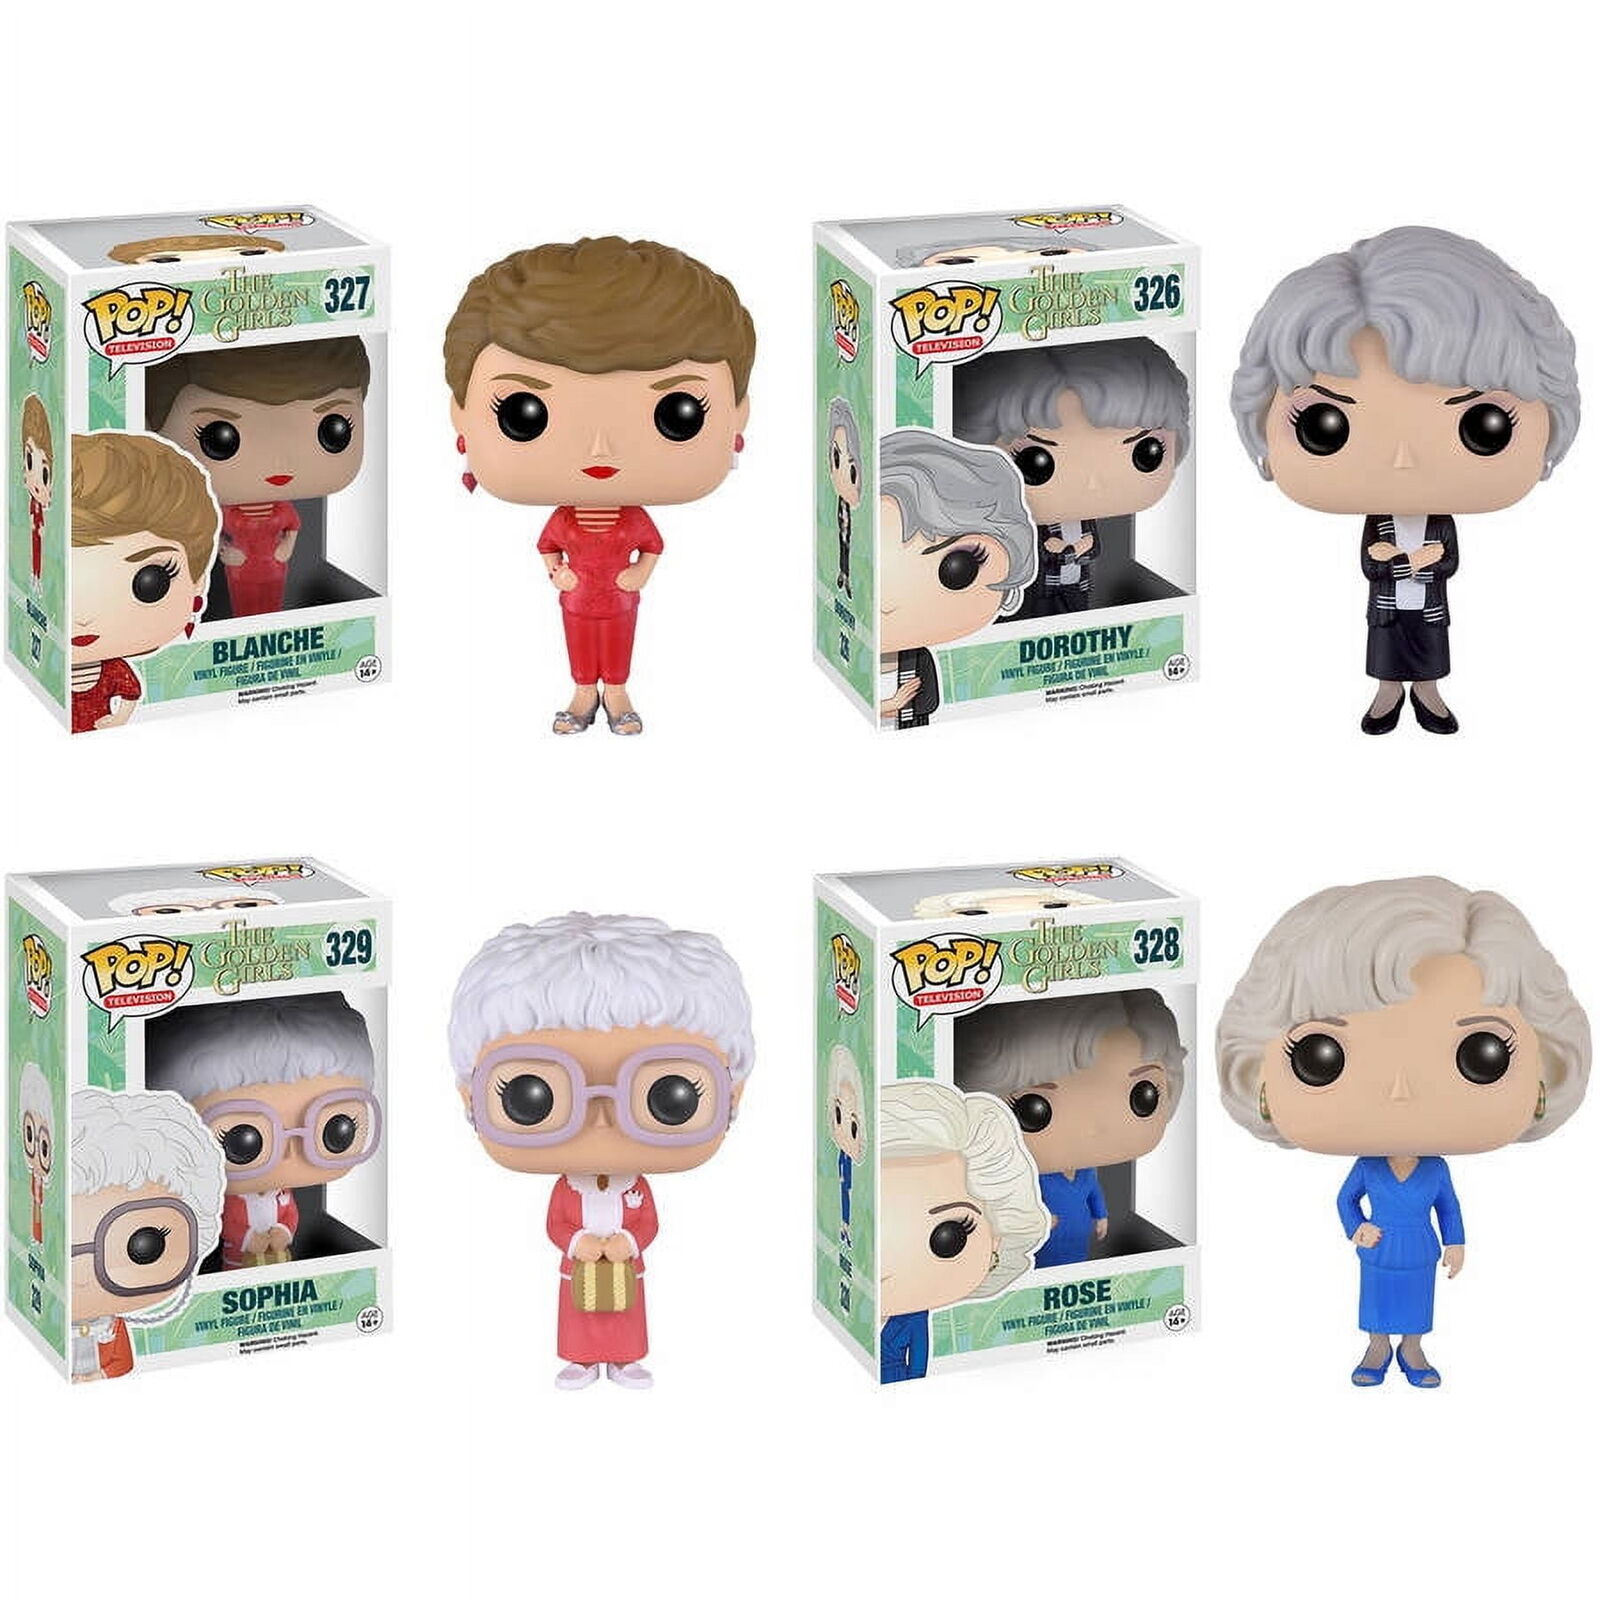 POP Golden Girls TV Collectors Set Featuring Sophia, Rose, Blanche and Dorothy